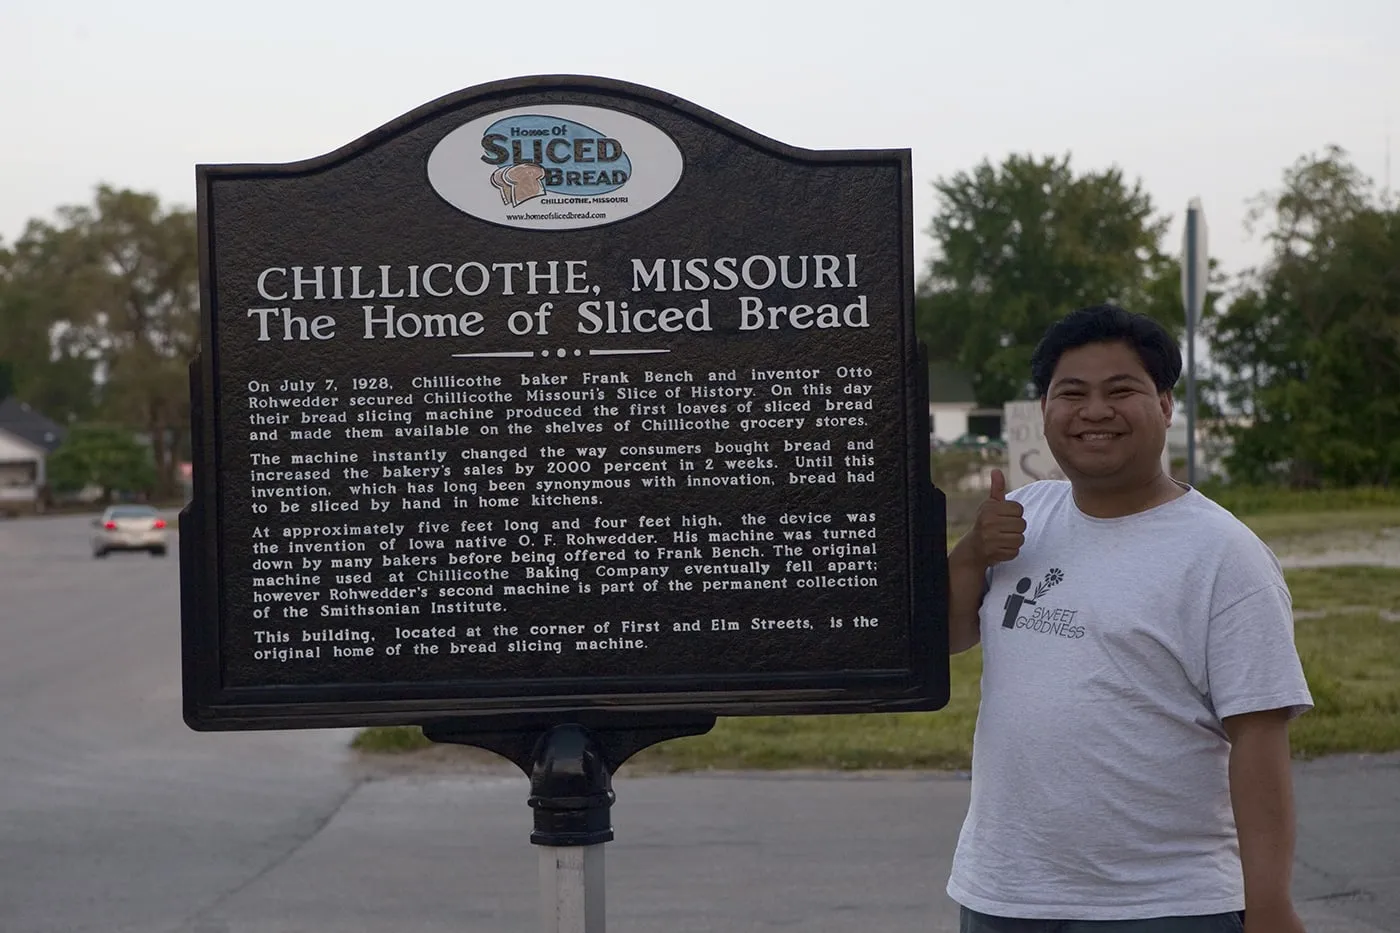 The Home of Sliced Bread in Chillicothe, Missouri.